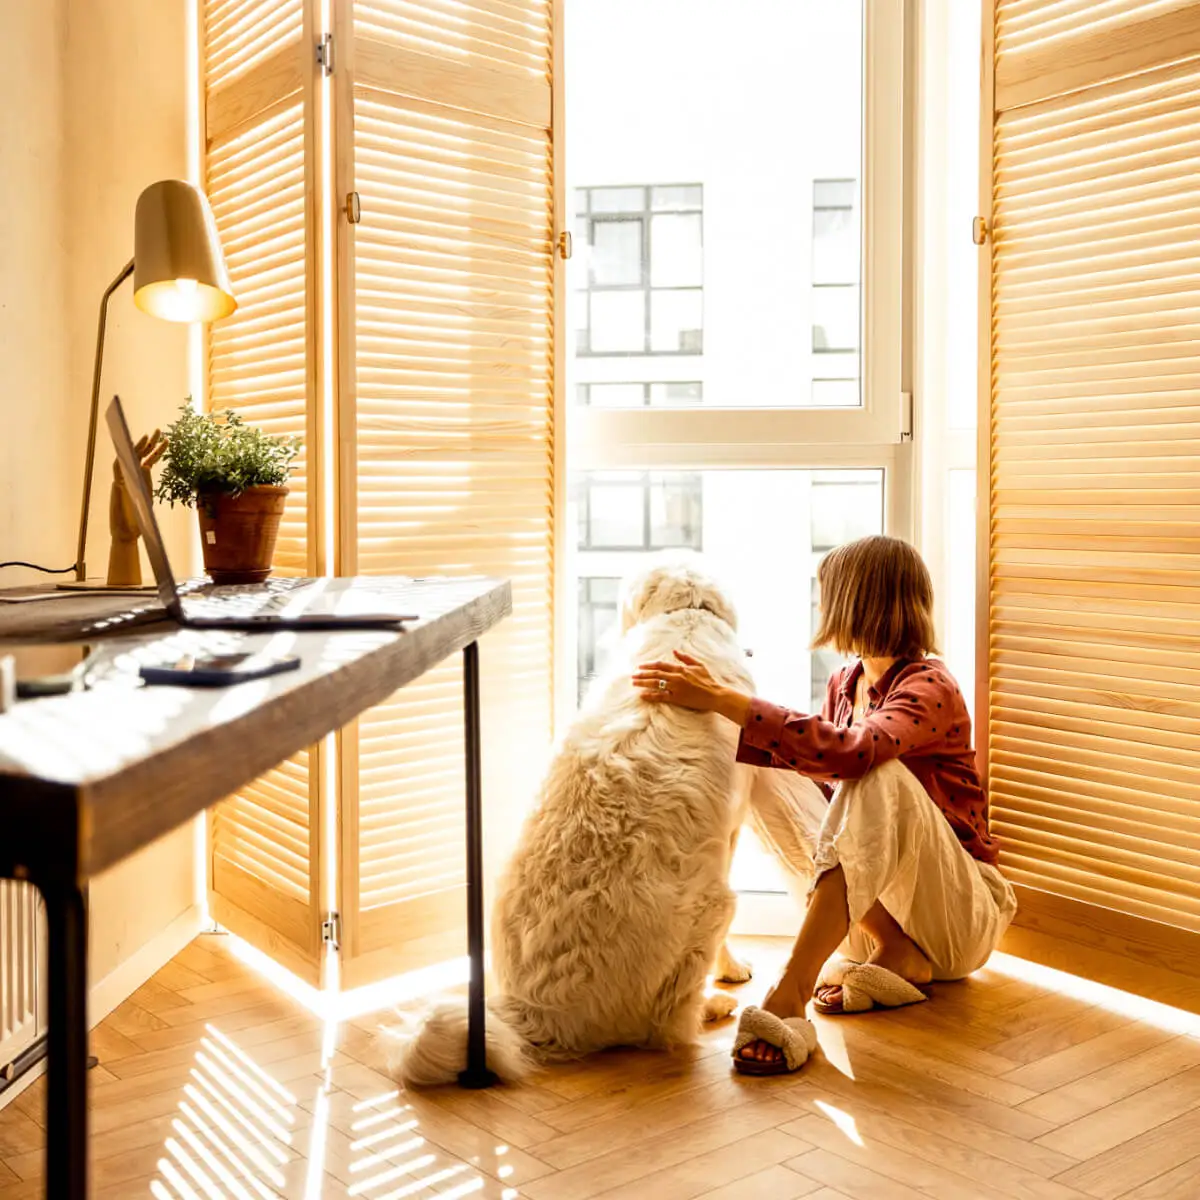 Lady sits on wooden floor in a sunlight room, her hand rests on her white dog sitting beside her, and she's leaning against wooden shutters.